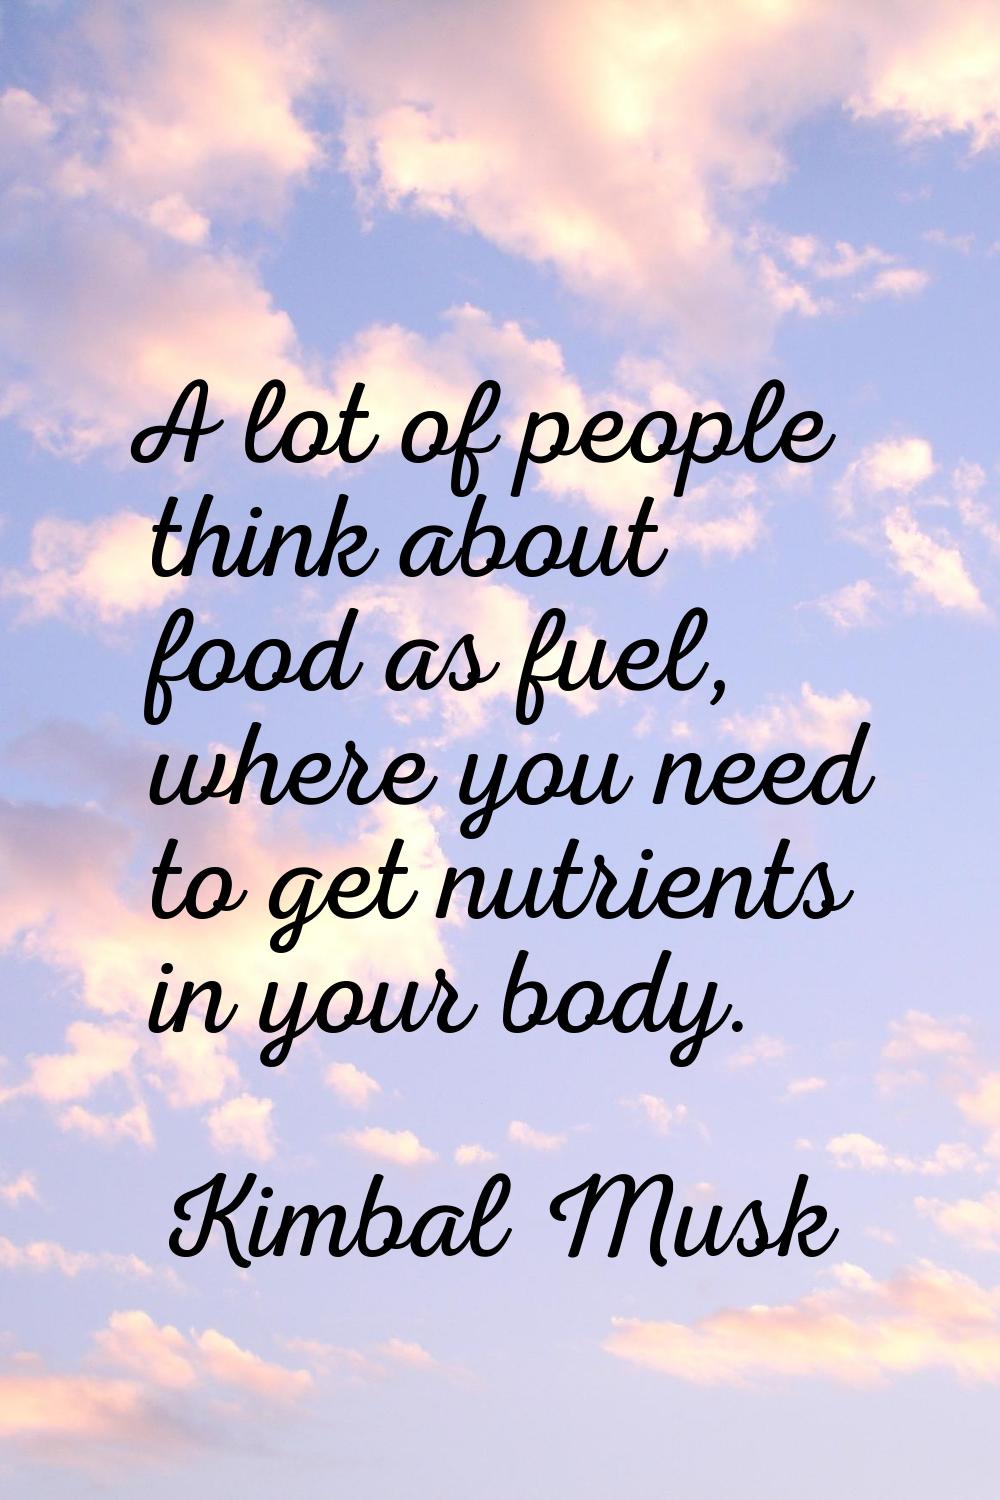 A lot of people think about food as fuel, where you need to get nutrients in your body.